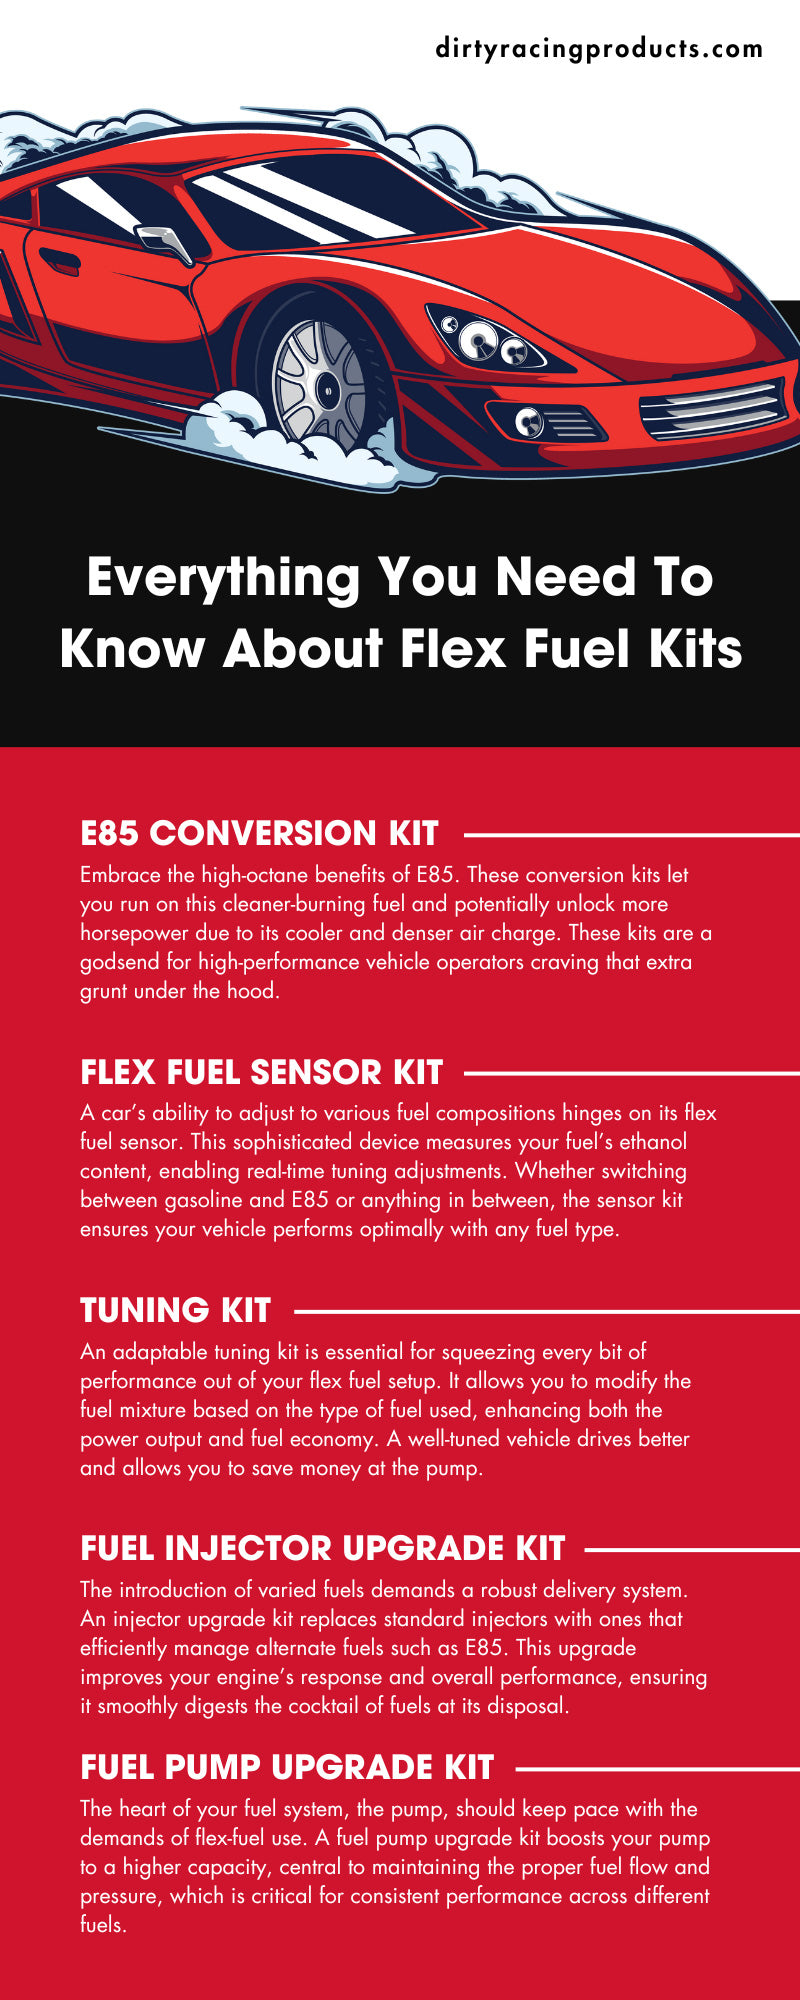 Everything You Need To Know About Flex Fuel Kits